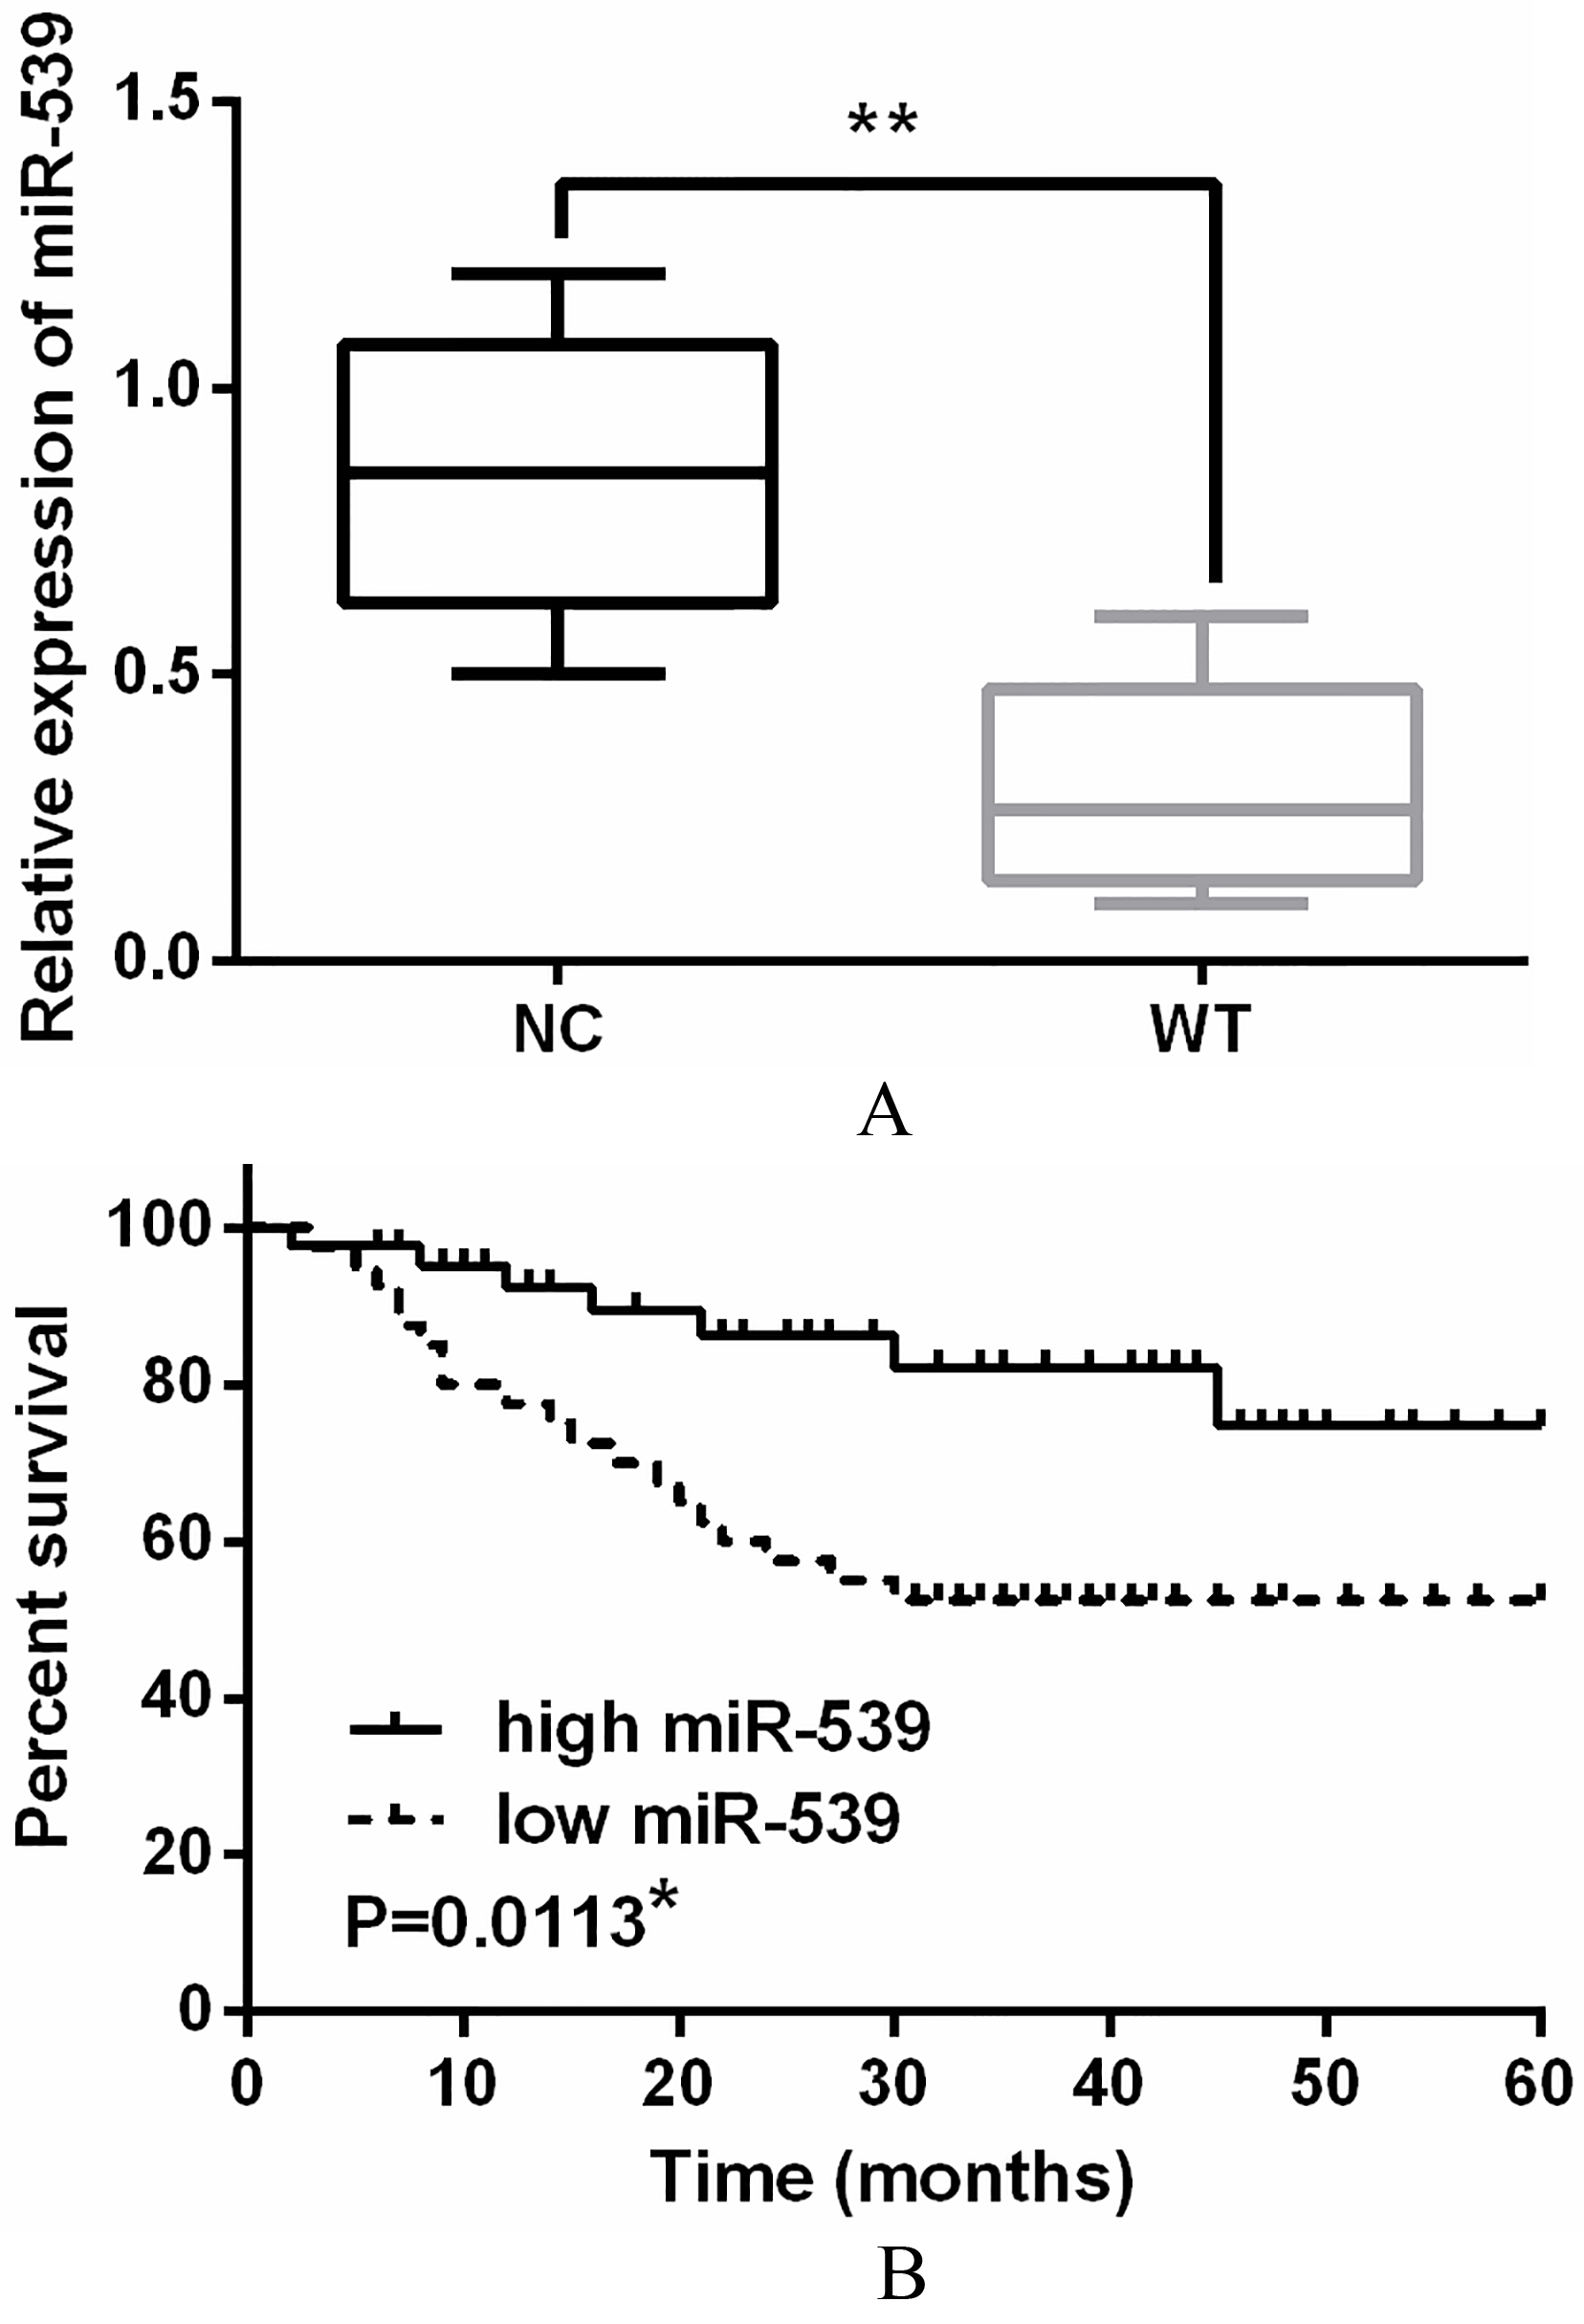 Downregulation of miR-539 was identified in WT tissues.(A) The expressions of miR-539 in WT tissues detected via qRT-PCR. (B) Low miR-539 expression was correlated with shorter overall survival of WT patients. *P< 0.05, **P< 0.01.